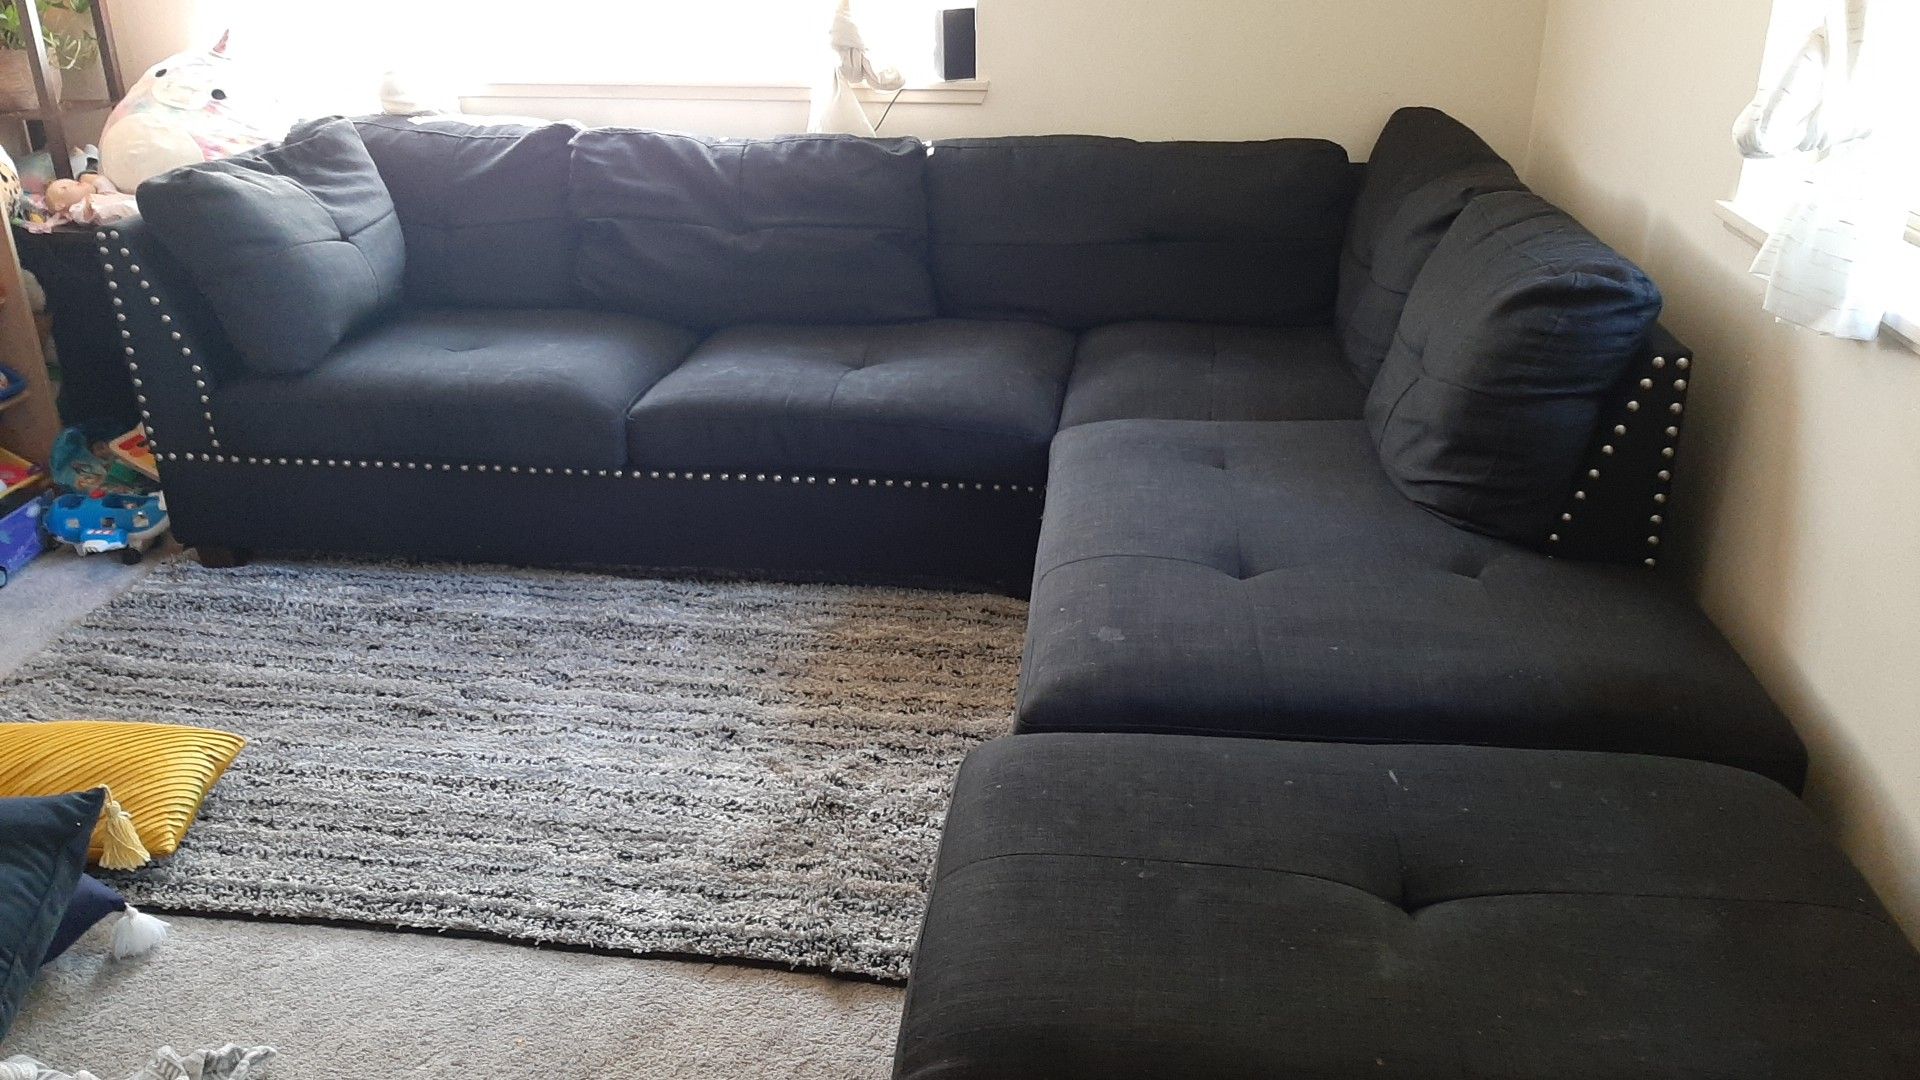 Couch, sofa, sectional